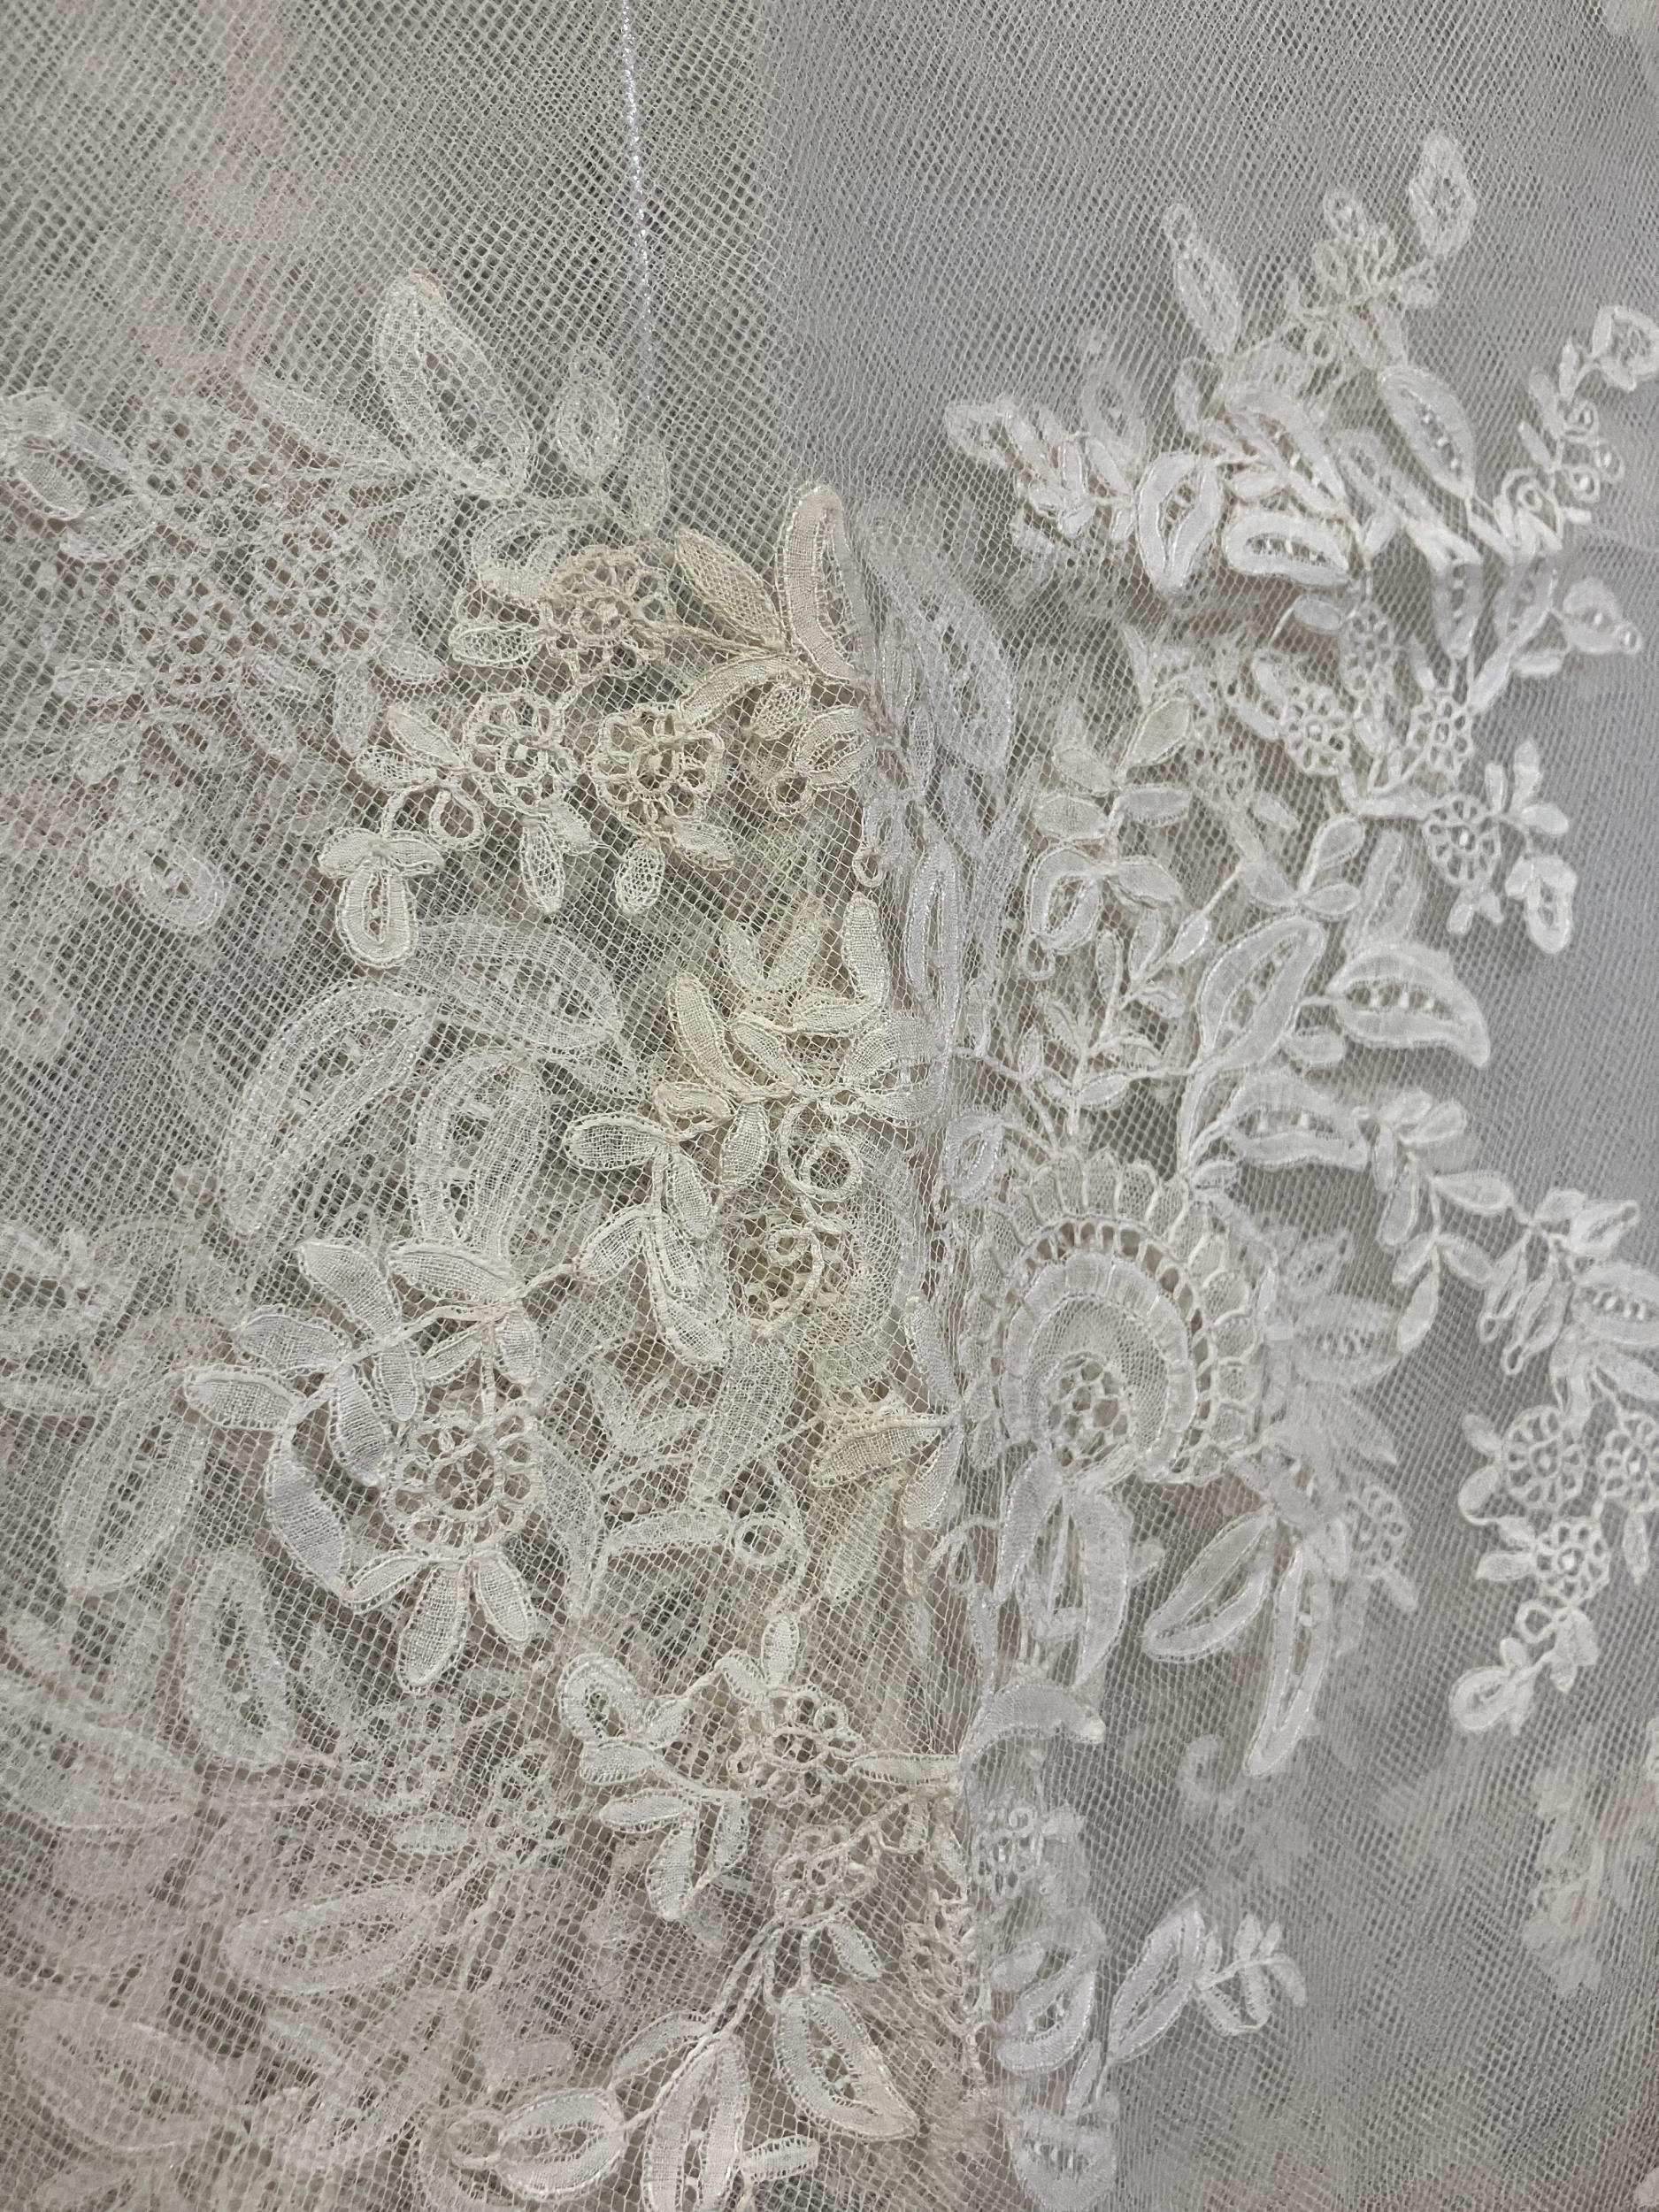 Antique Lace: a good Honiton appliqué wedding veil, with scalloped border, and large floral sprays - Image 4 of 7